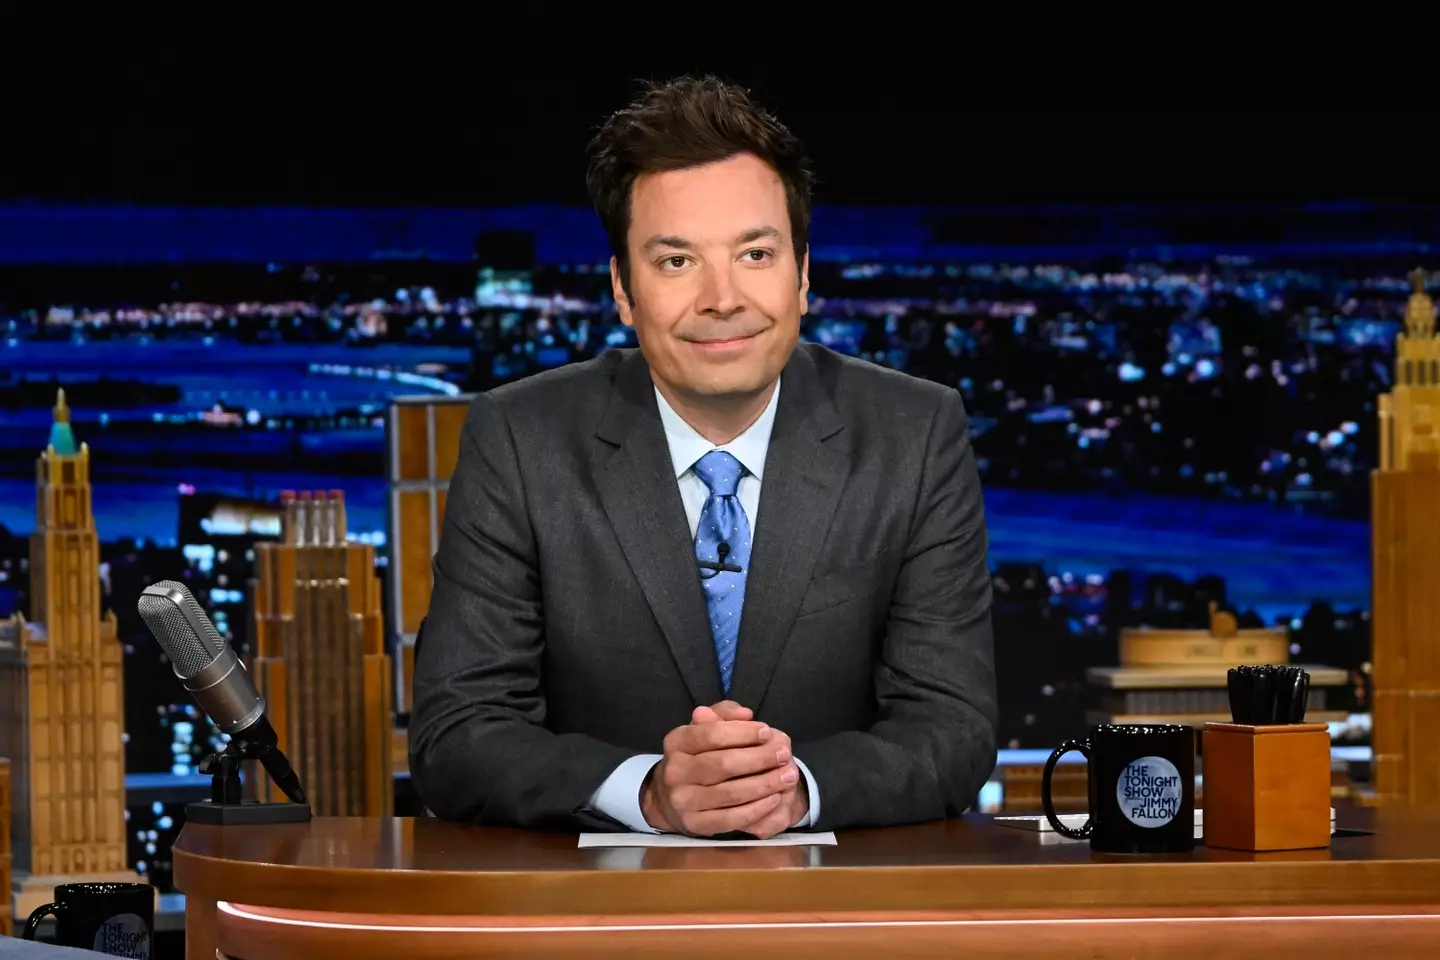 Fallon has hosted The Tonight Show since 2014.